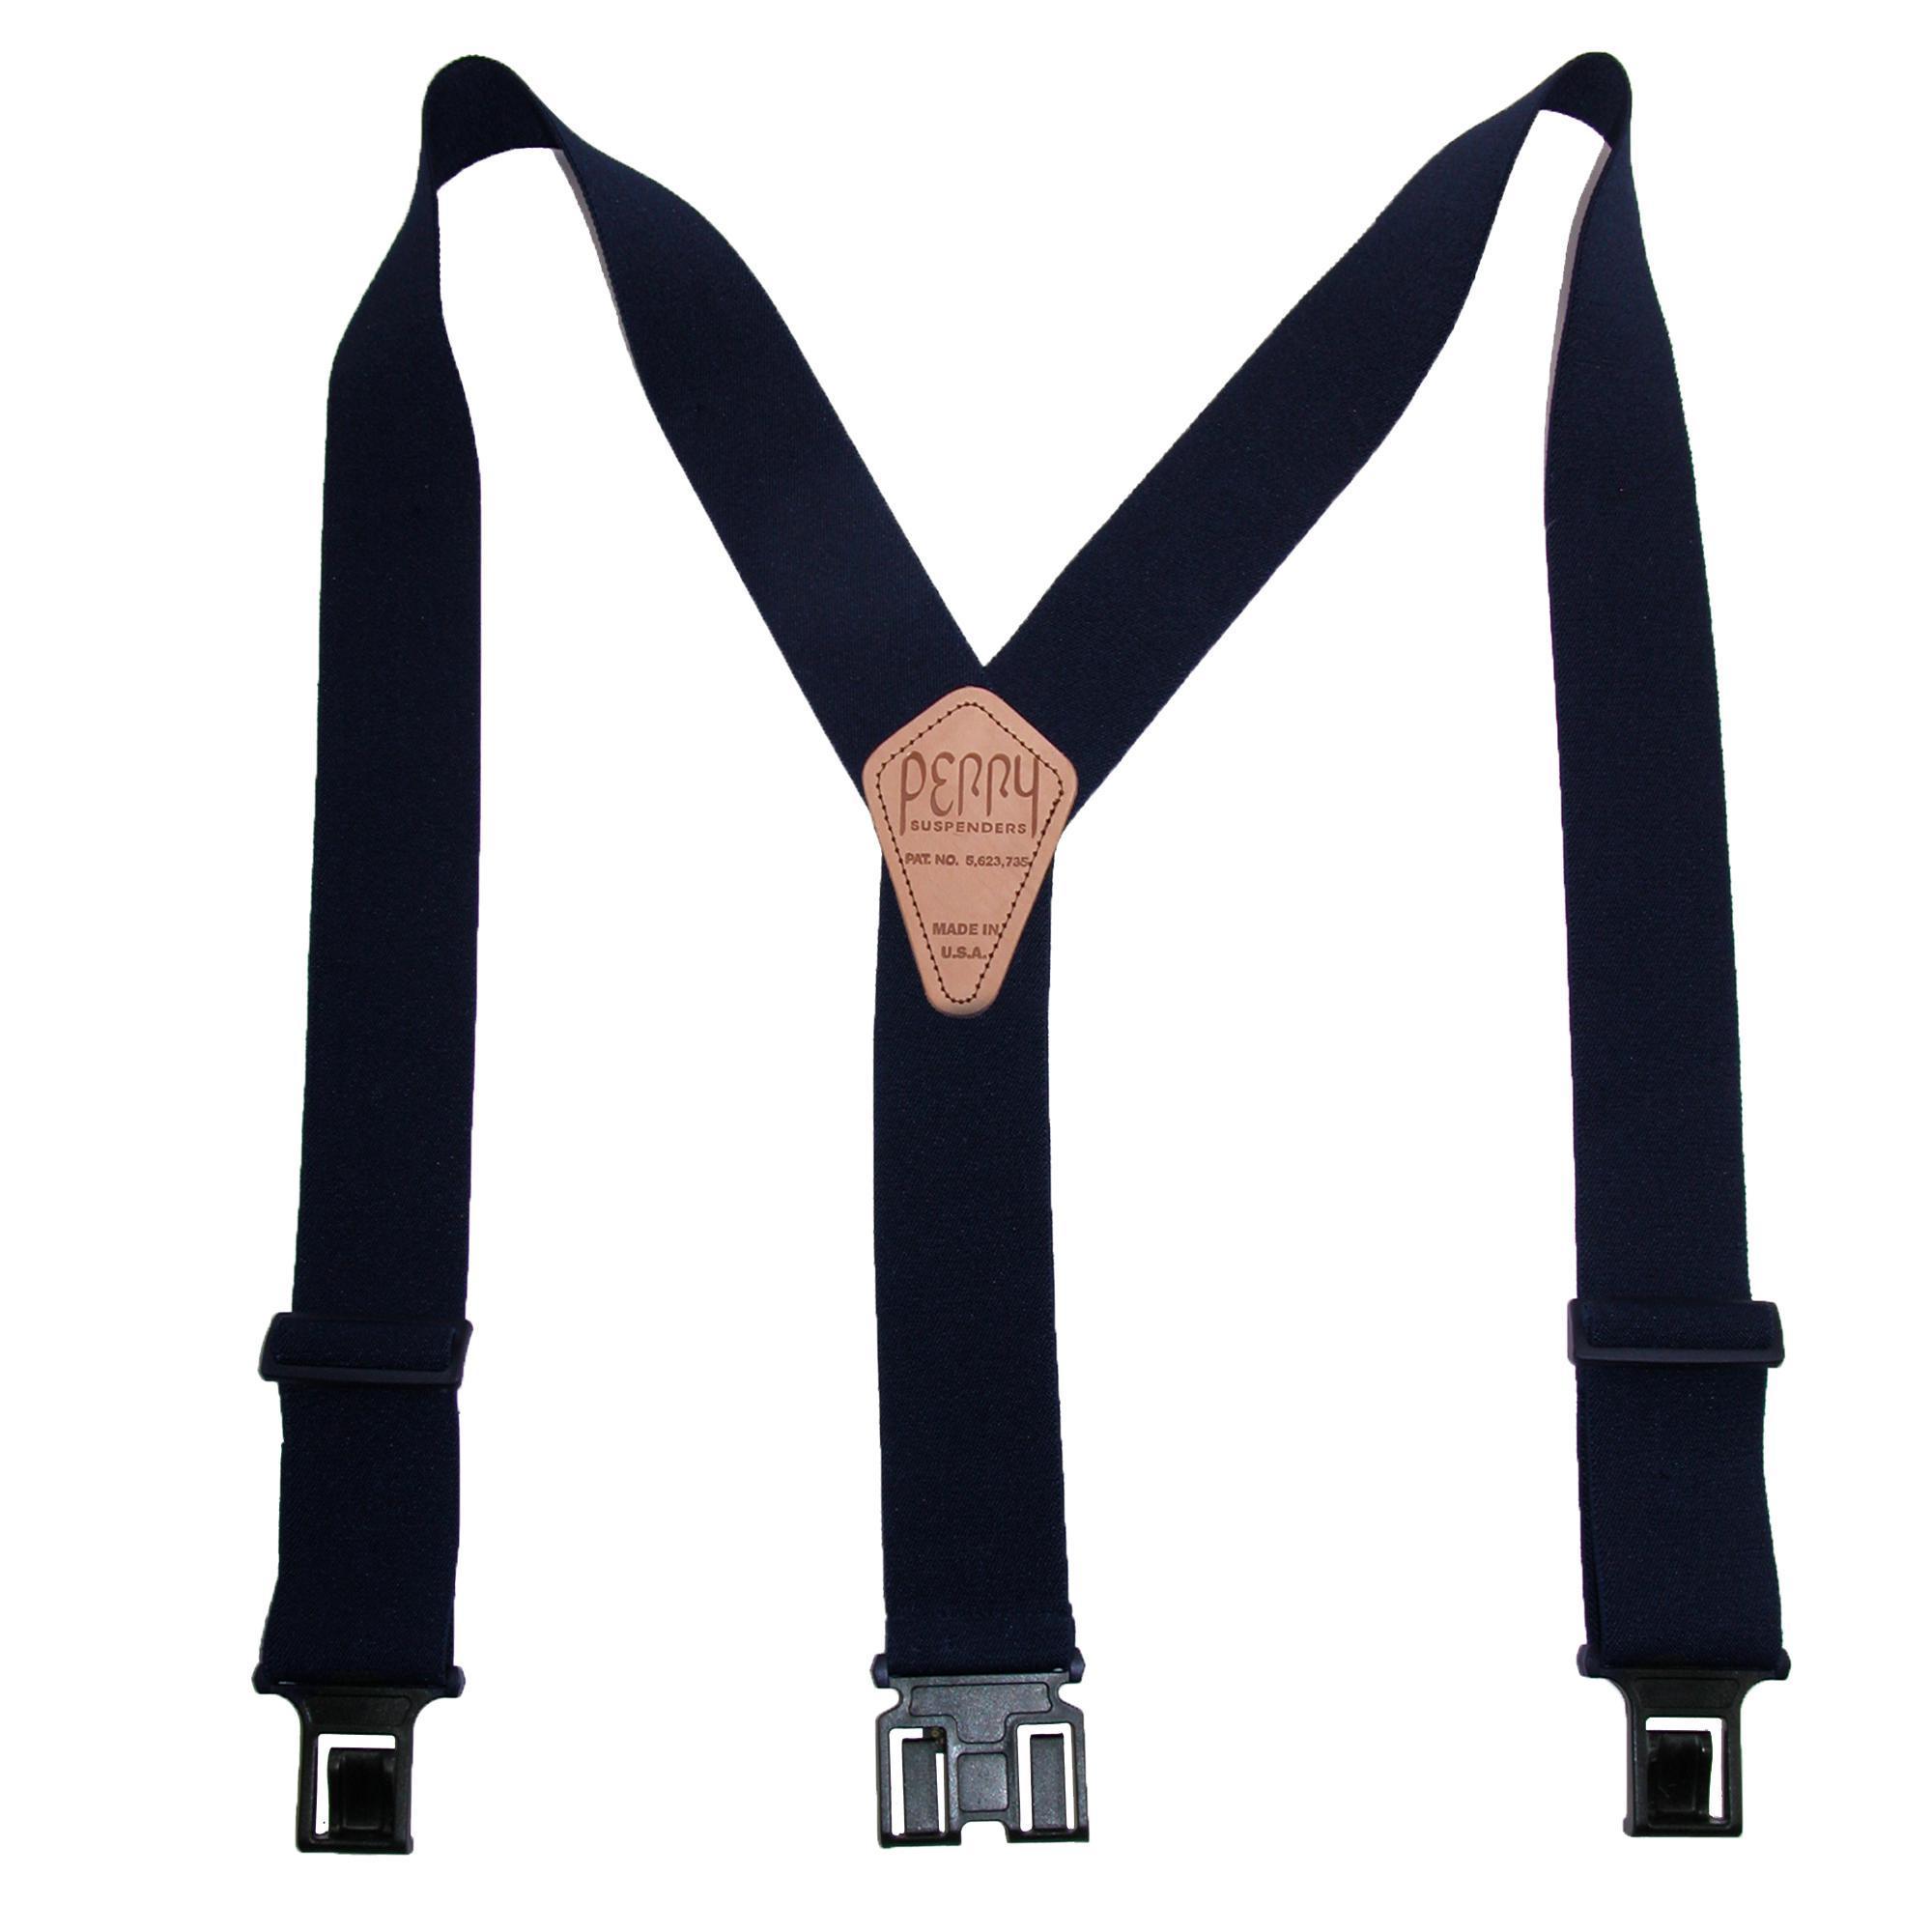 Perry Suspenders Men's Elastic 2 Inch Wide Hook End Suspenders (Tall Available)